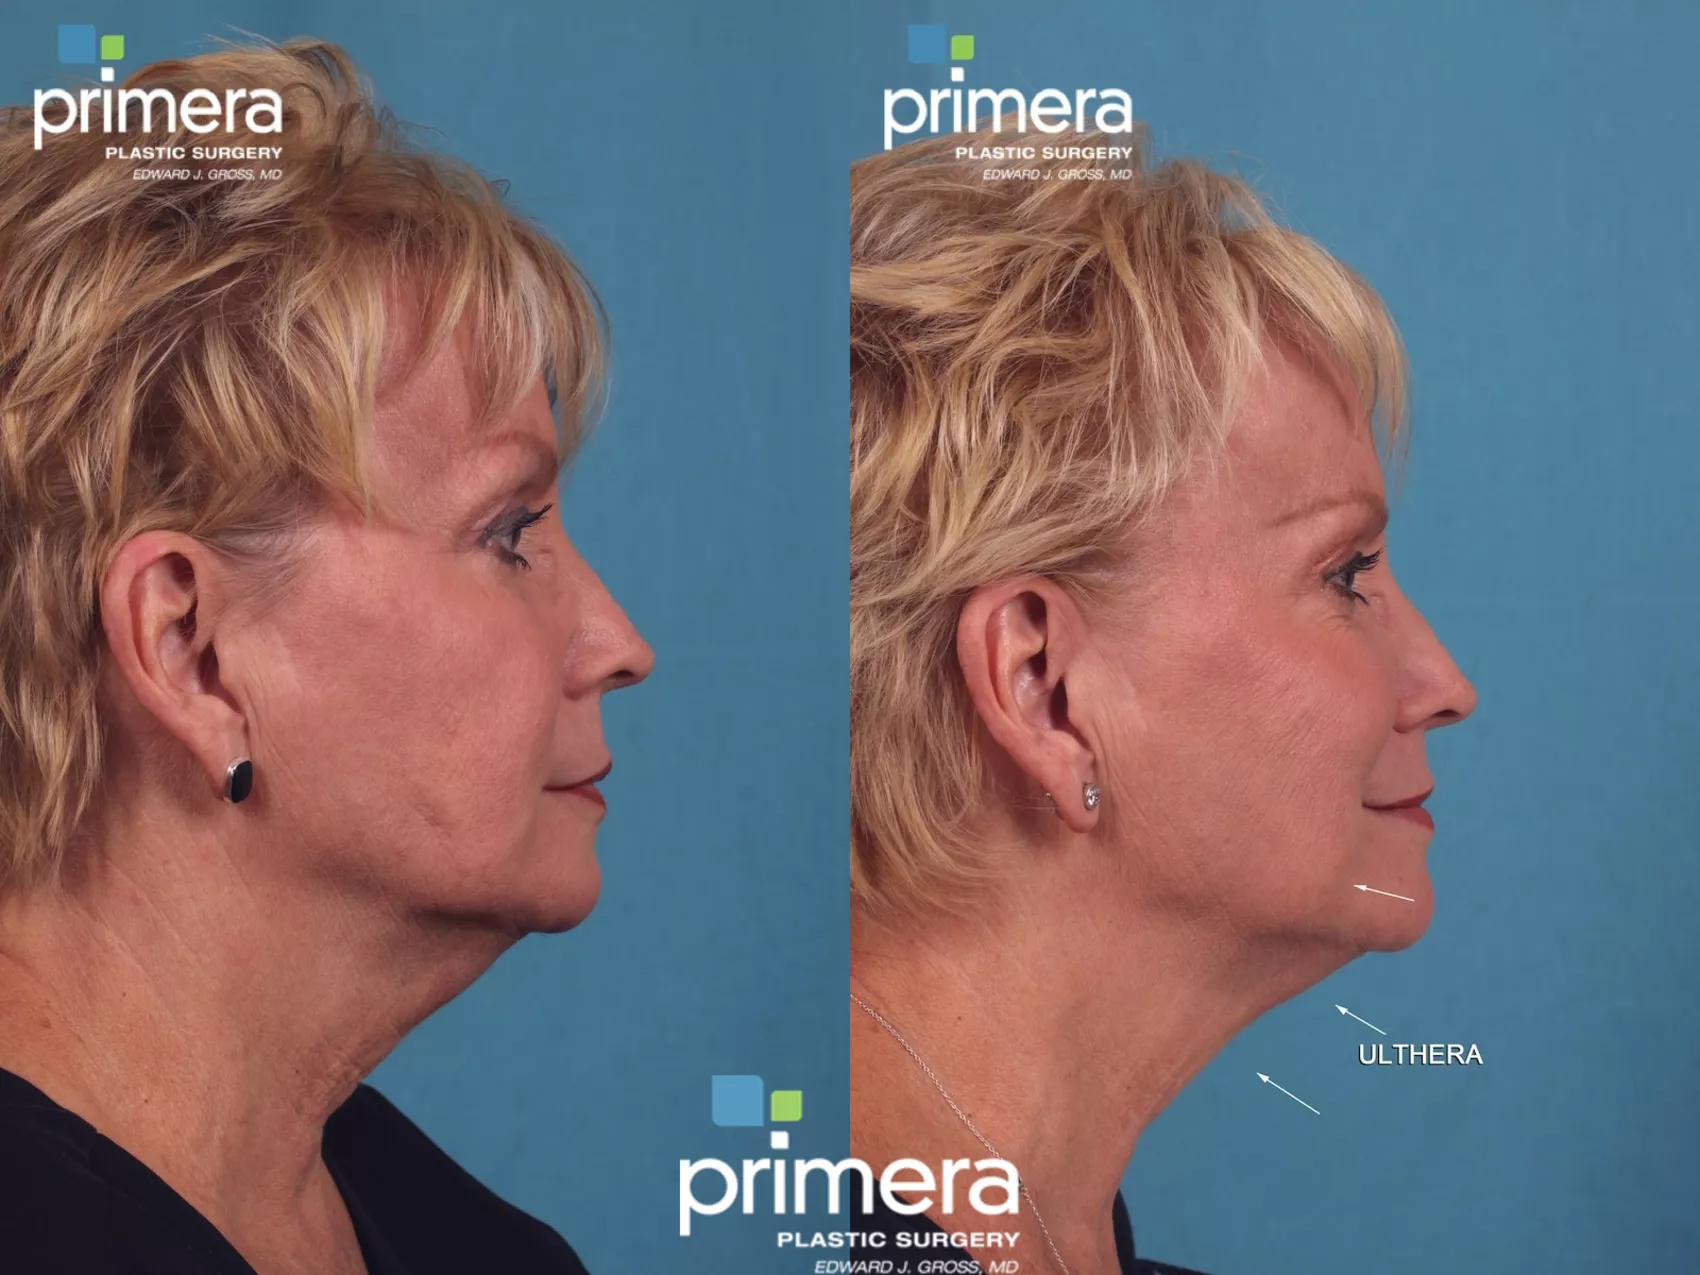 Ulthera Facial Skin Tightening West Island, Montreal - Plastic Surgery